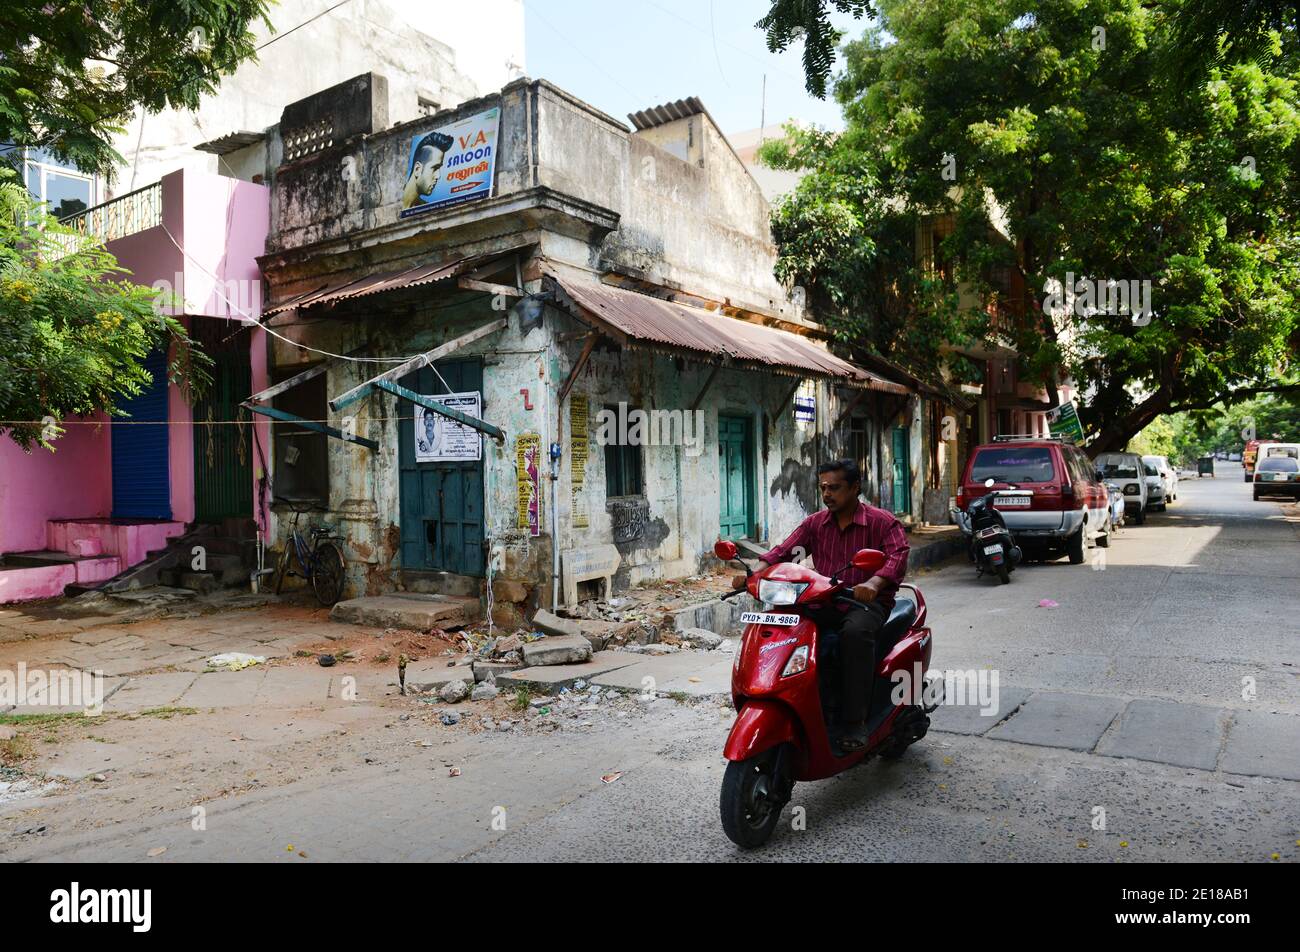 Old buildings in the old historical town of Pondicherry, India. Stock Photo